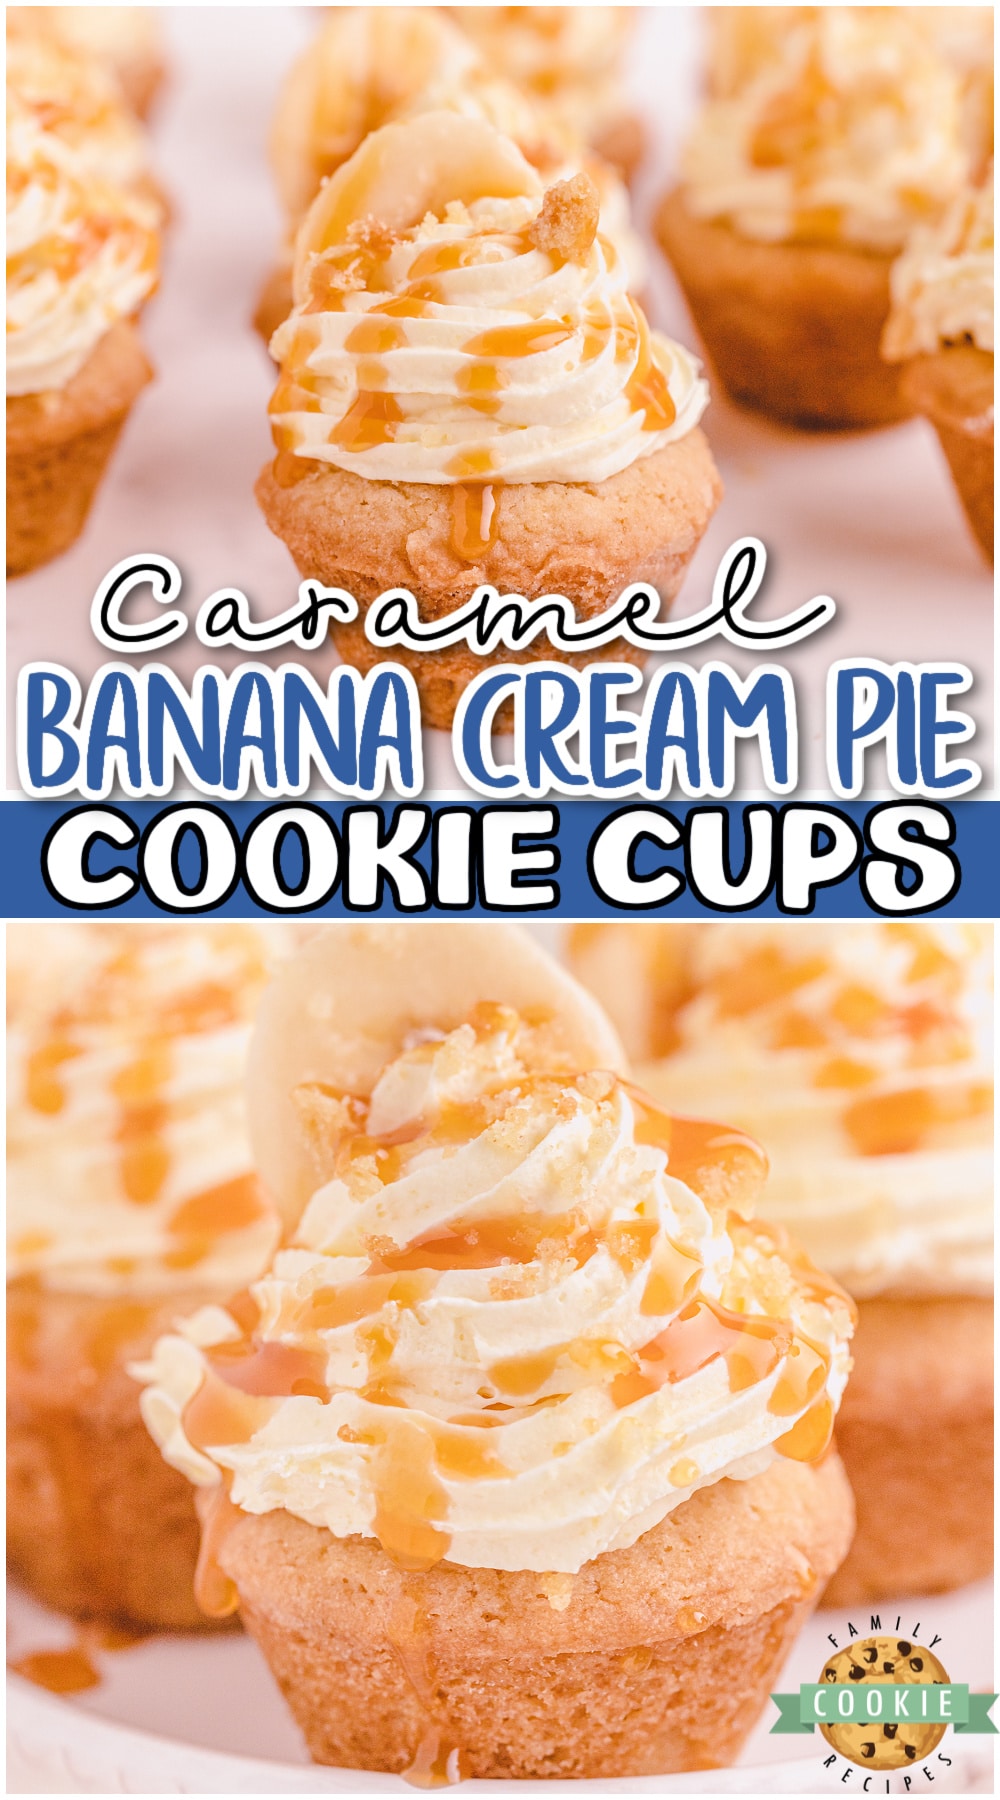 Caramel Banana Cream Pie Cookies are tiny banana cream pies topped with buttery caramel! Sugar cookies topped with a sweet creamy banana filling and caramel for a decadent treat!